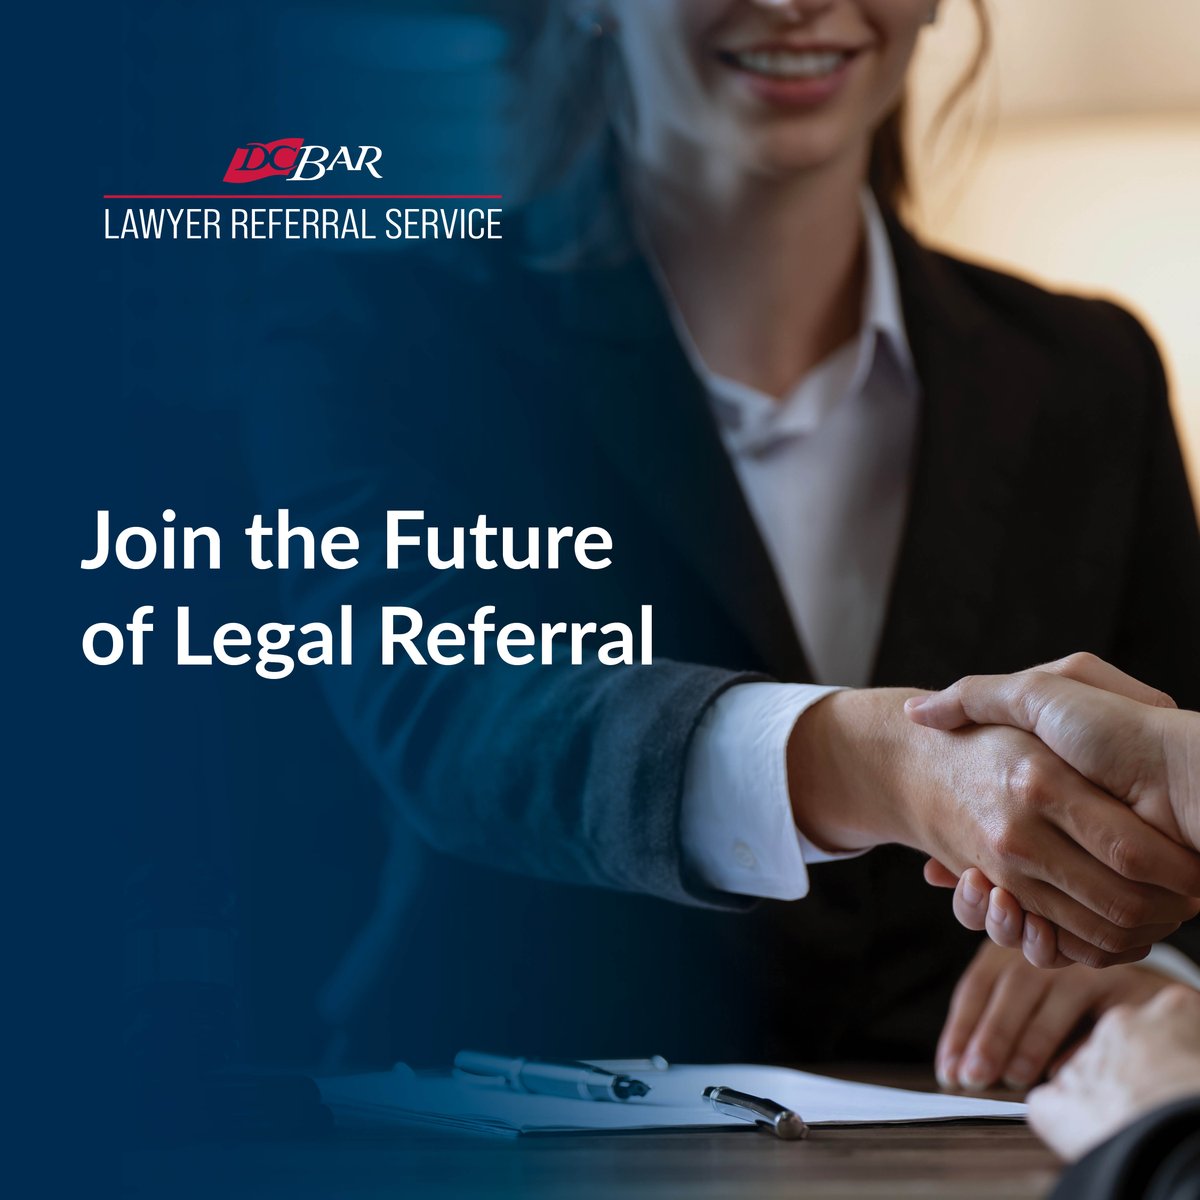 Join the new D.C. Bar Lawyer Referral Service (LRS) powered by AI. Get matched with clients whose legal needs fit within your practice. This service is available exclusively to members during license renewal for just $119. Renew and sign up for LRS today! bit.ly/3W3kwU5